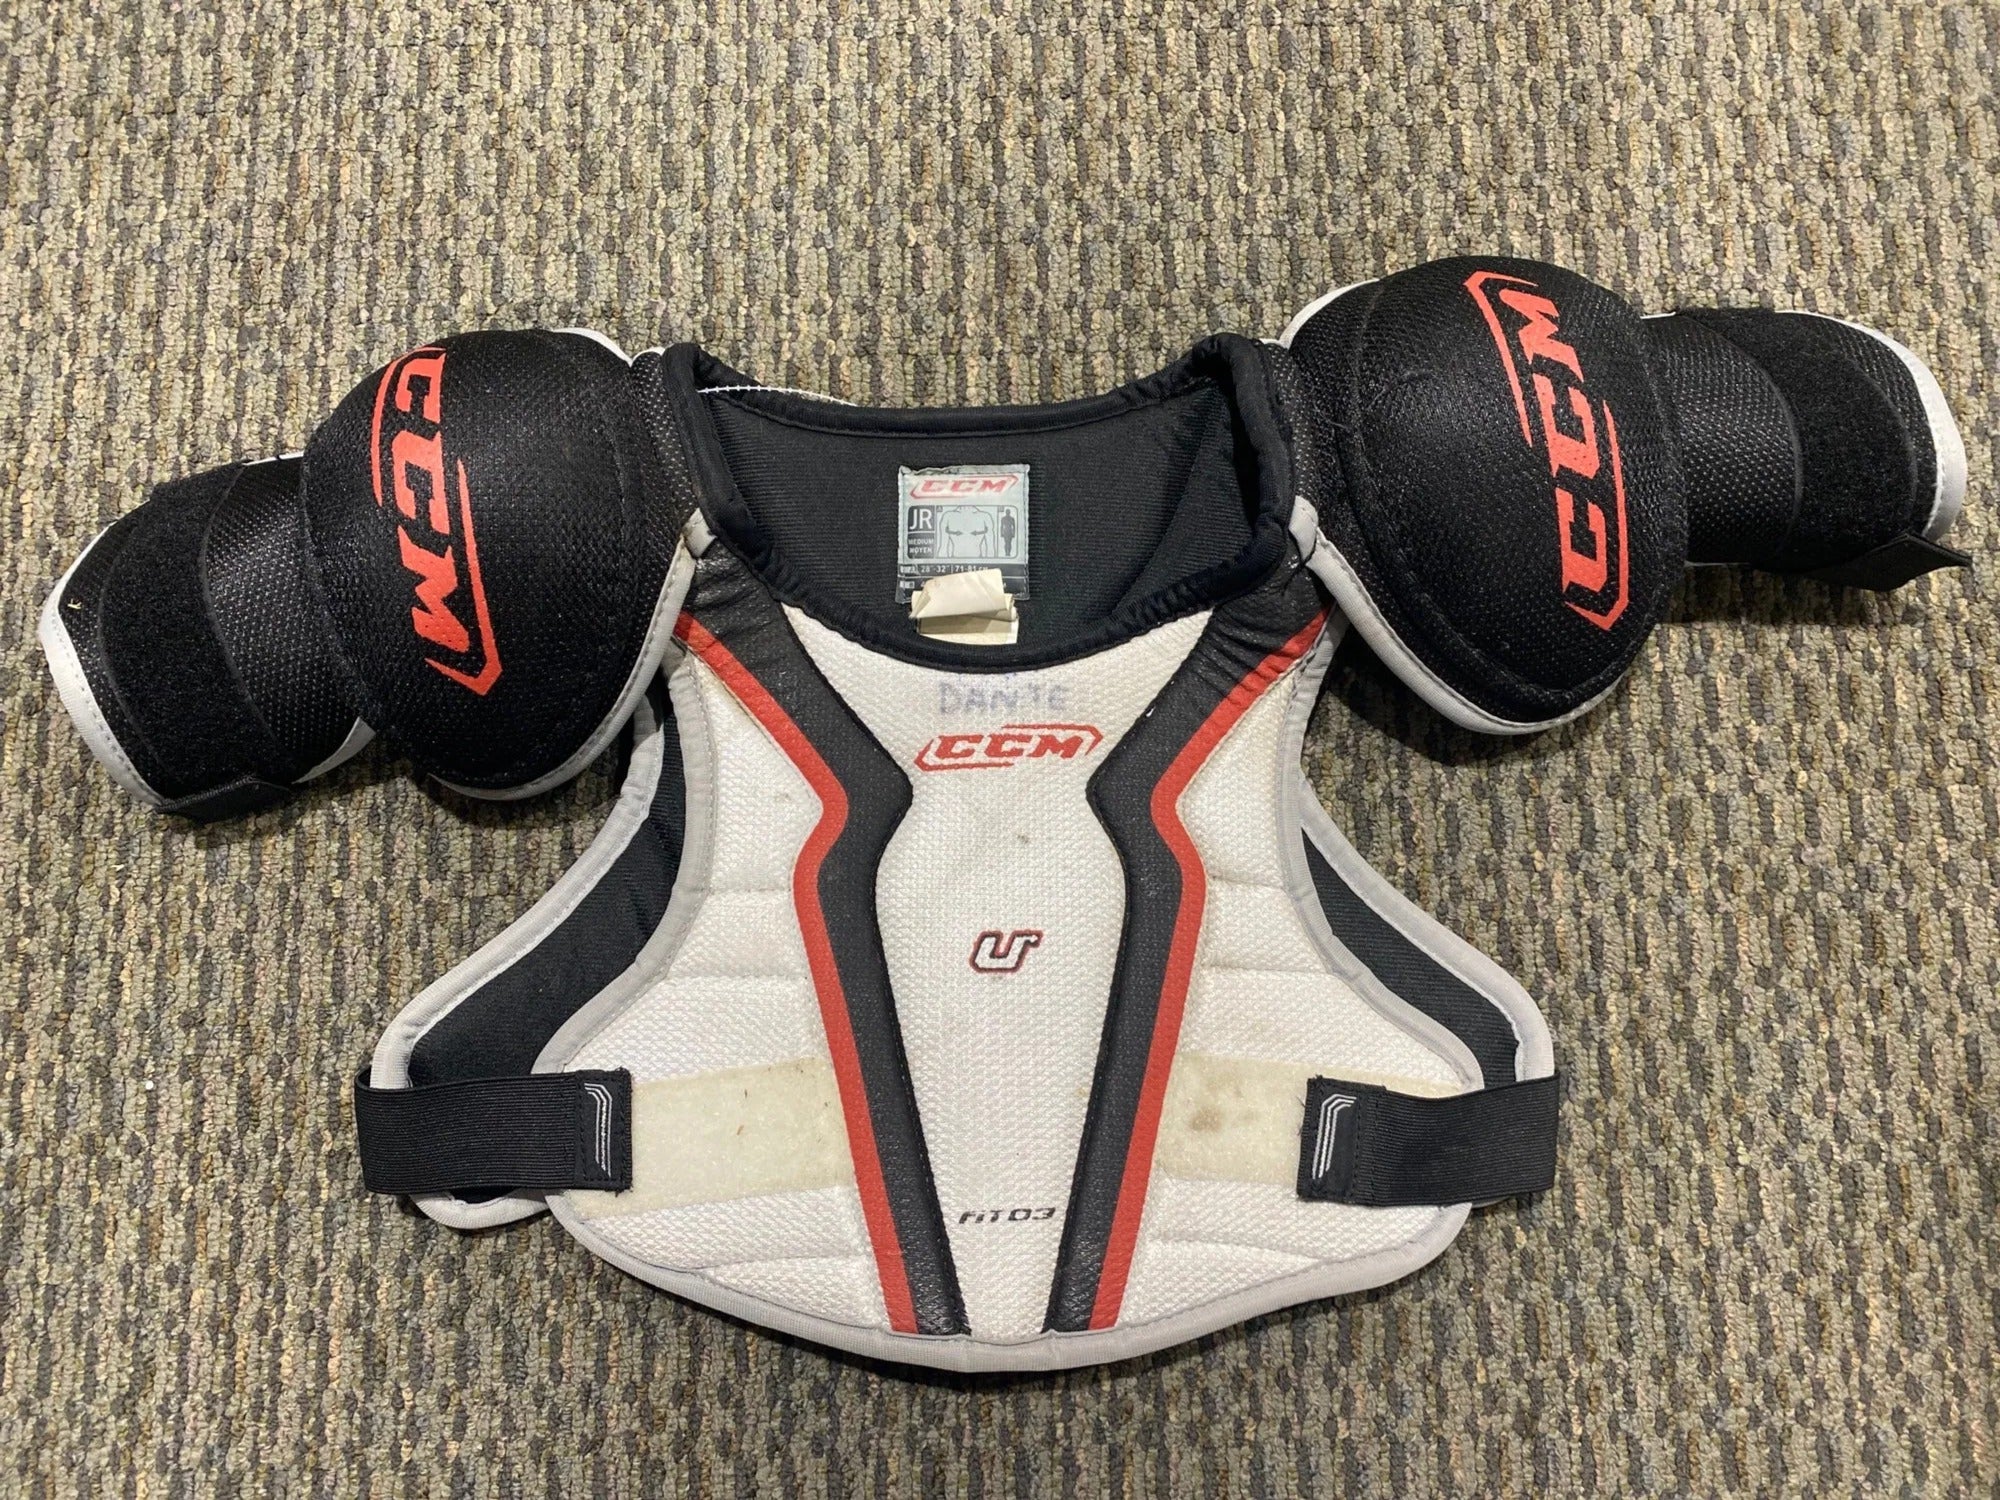 Hockey Gear and Equipment for sale New and Used on SidelineSwap